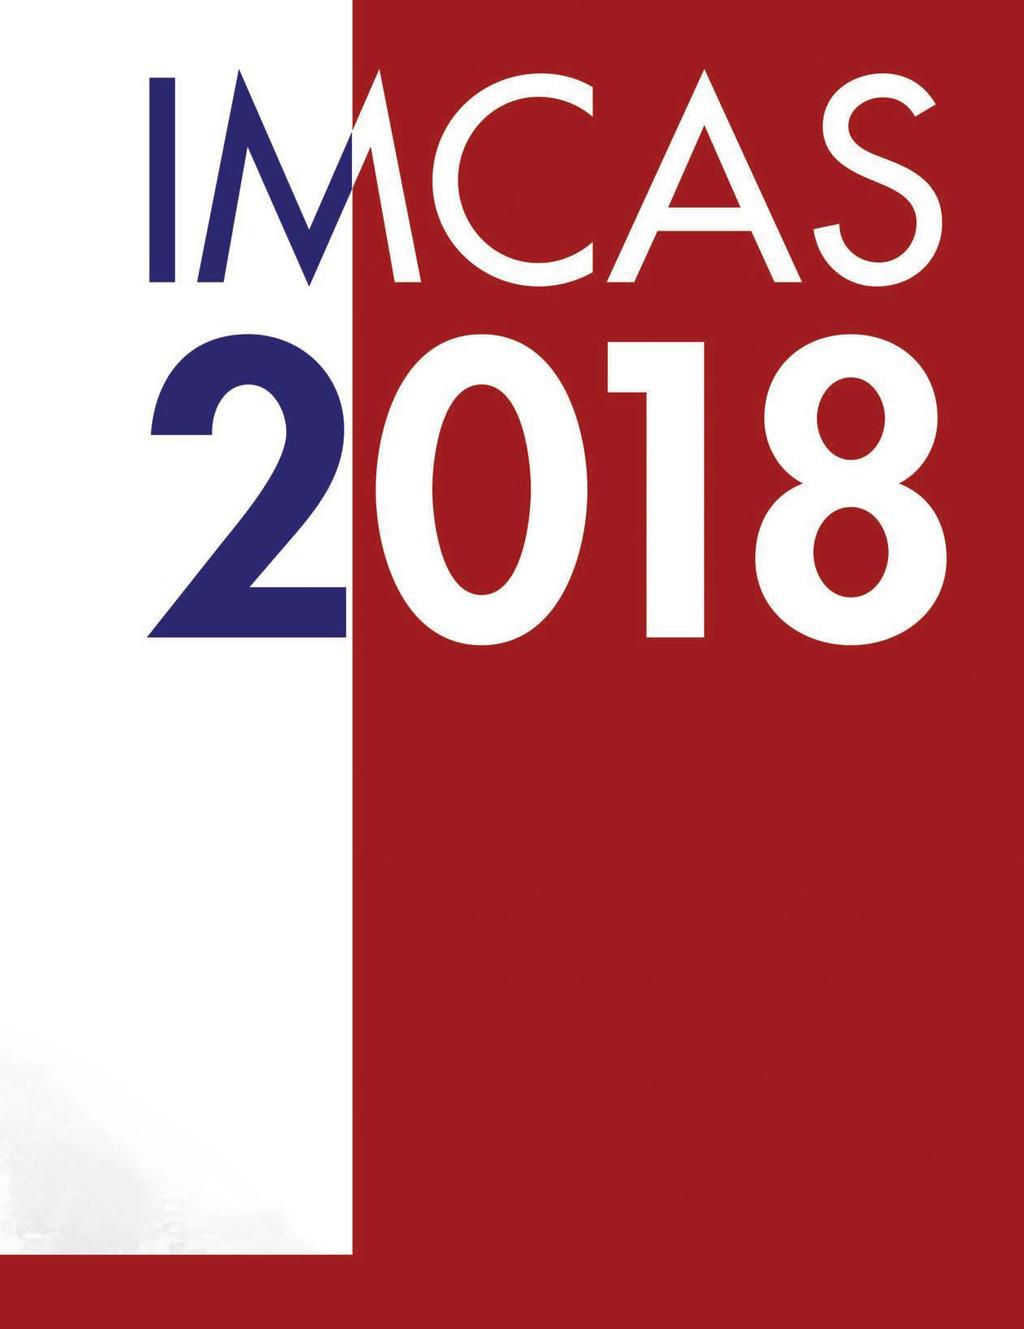 IMCAS Celebrates 20 Years of Educational Excellence and Innovation in Aesthetic Medicine By Jeffrey Frentzen, Executive Editor E very year the International Master Course on Aging Science (IMCAS)